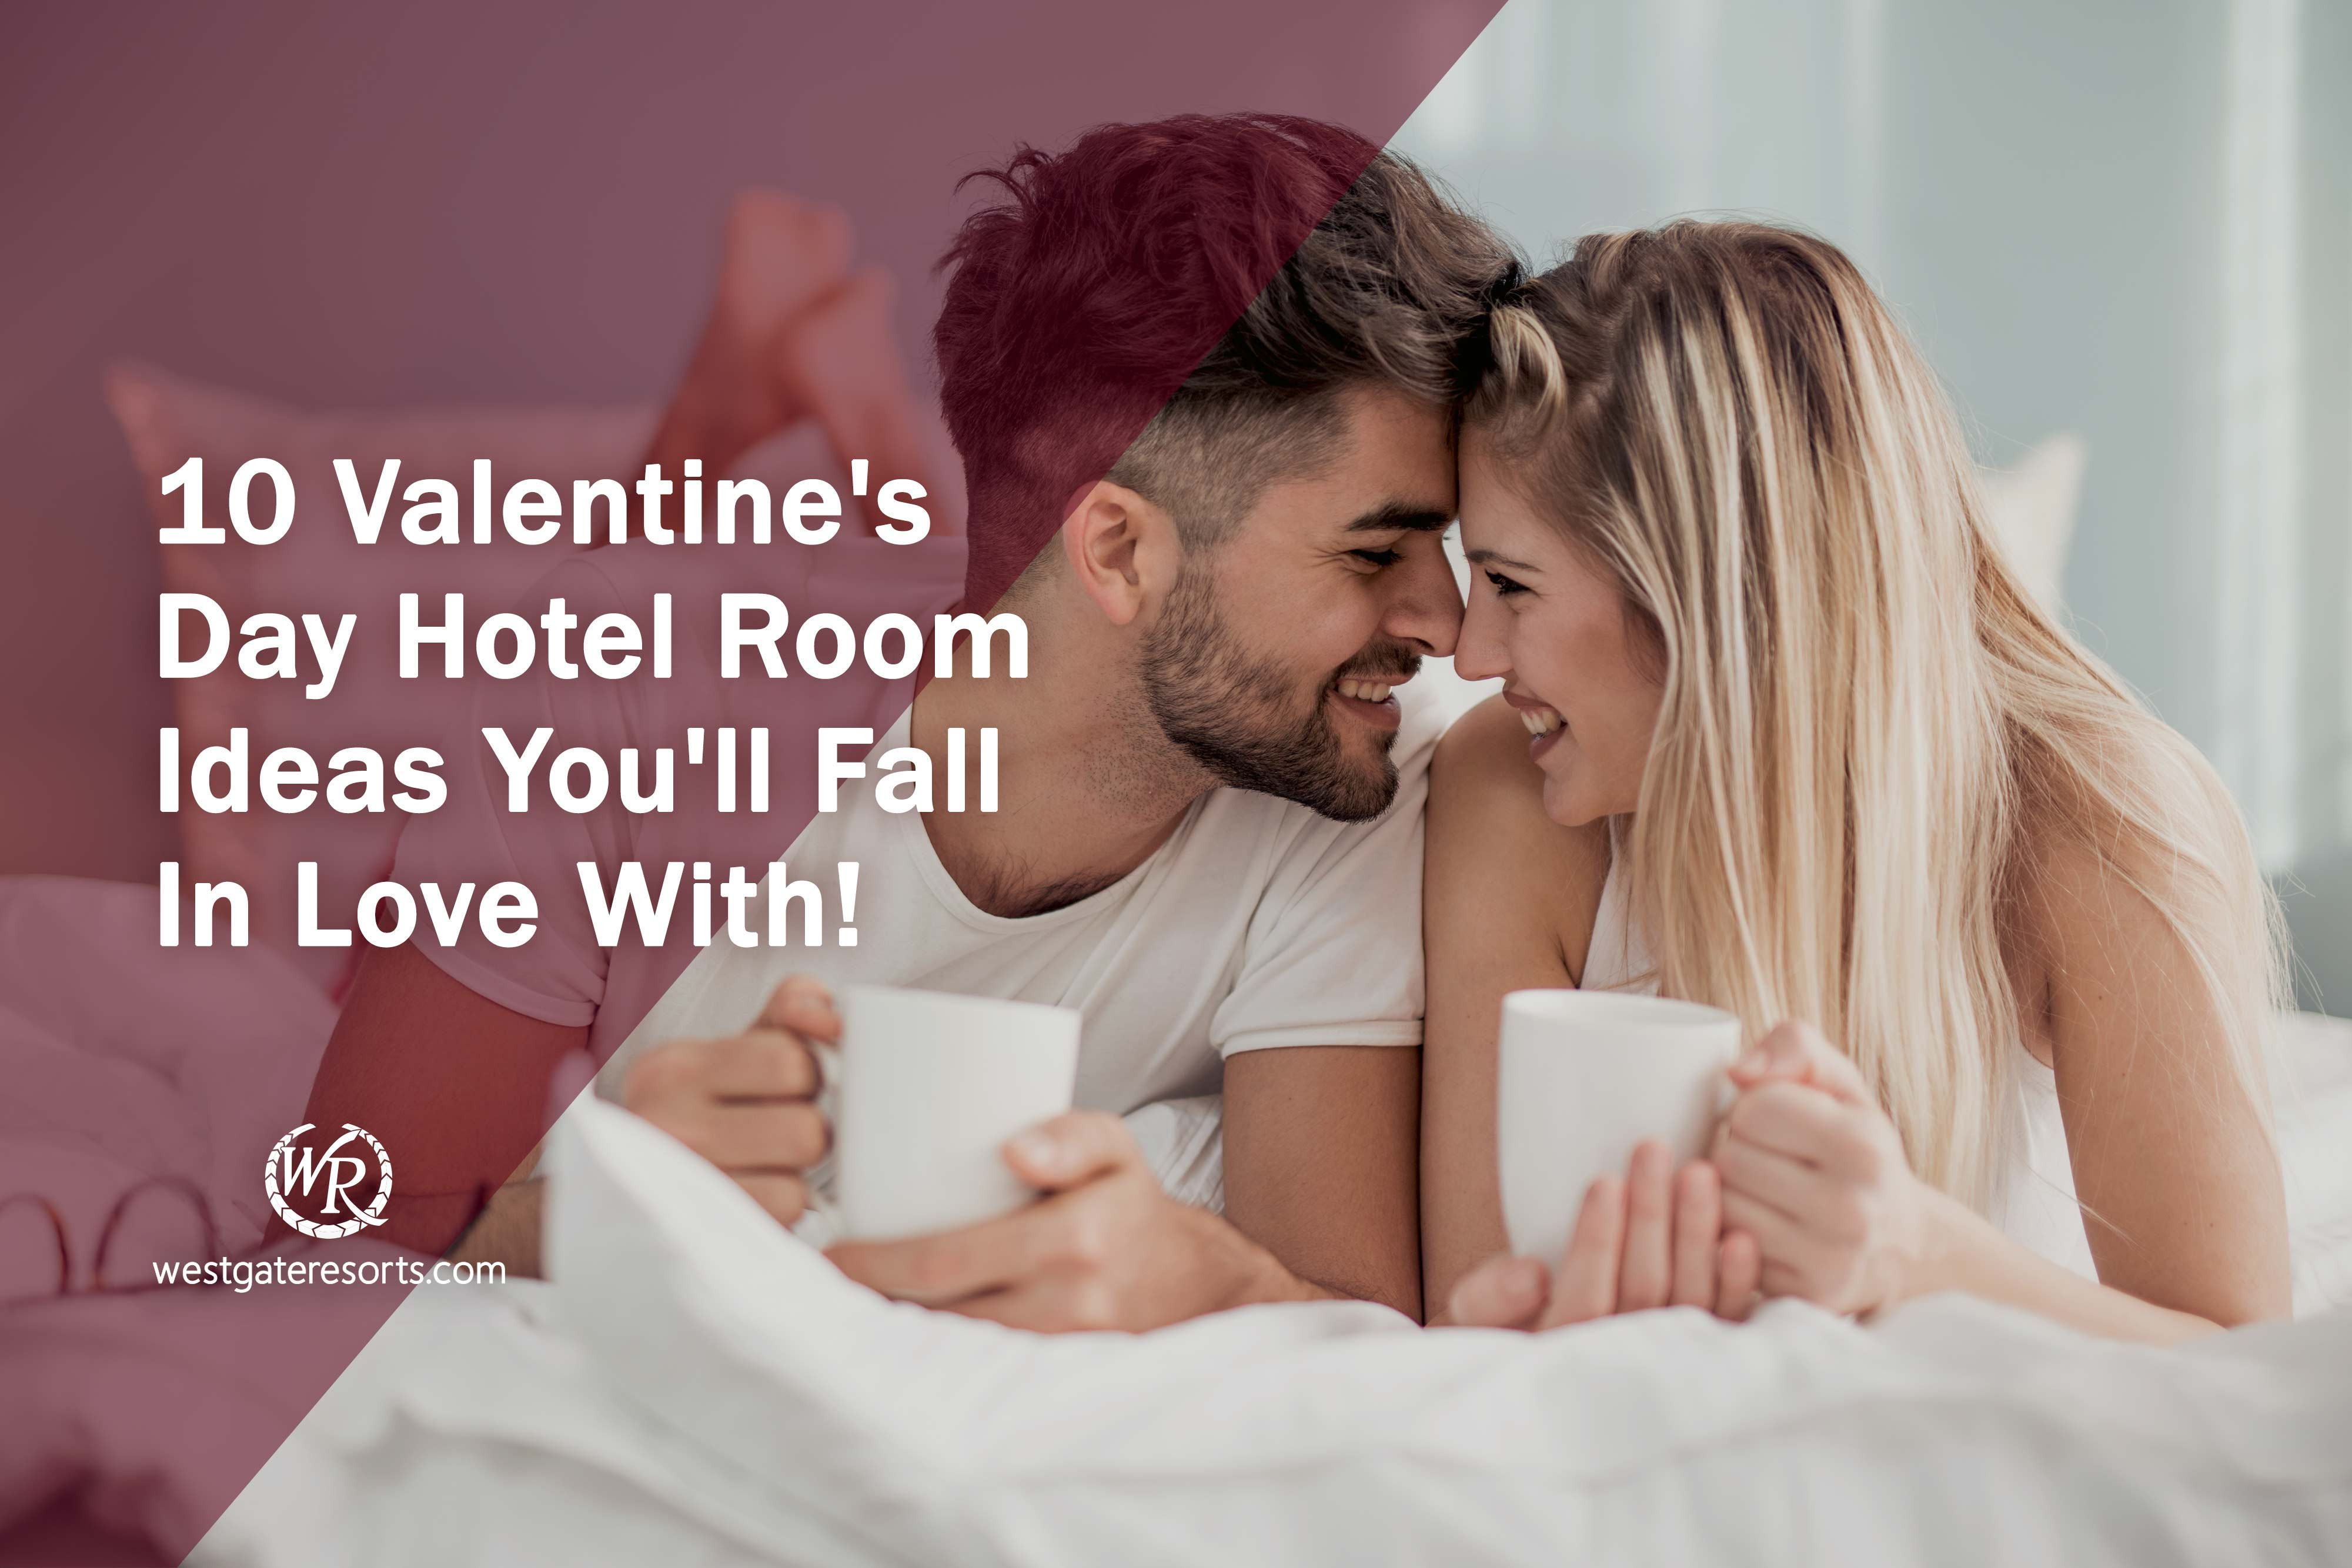 10 Valentine's Day Hotel Room Ideas You'll Fall In Love With!